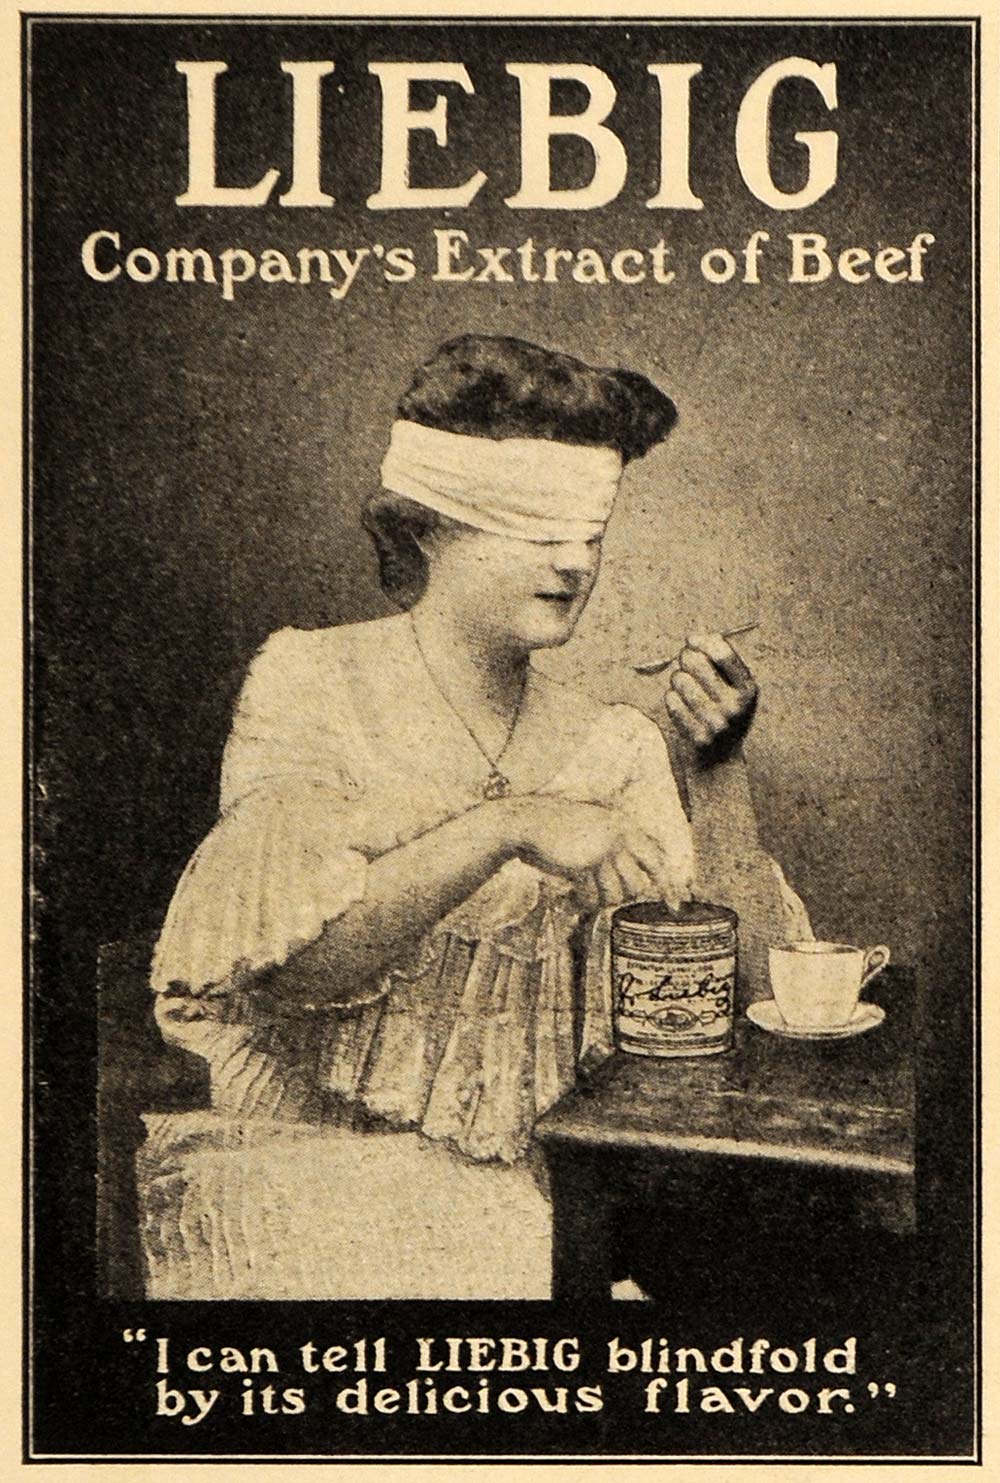 1911 Ad Liebig Company Extract of Beef Blindfold Flavor - ORIGINAL EM1